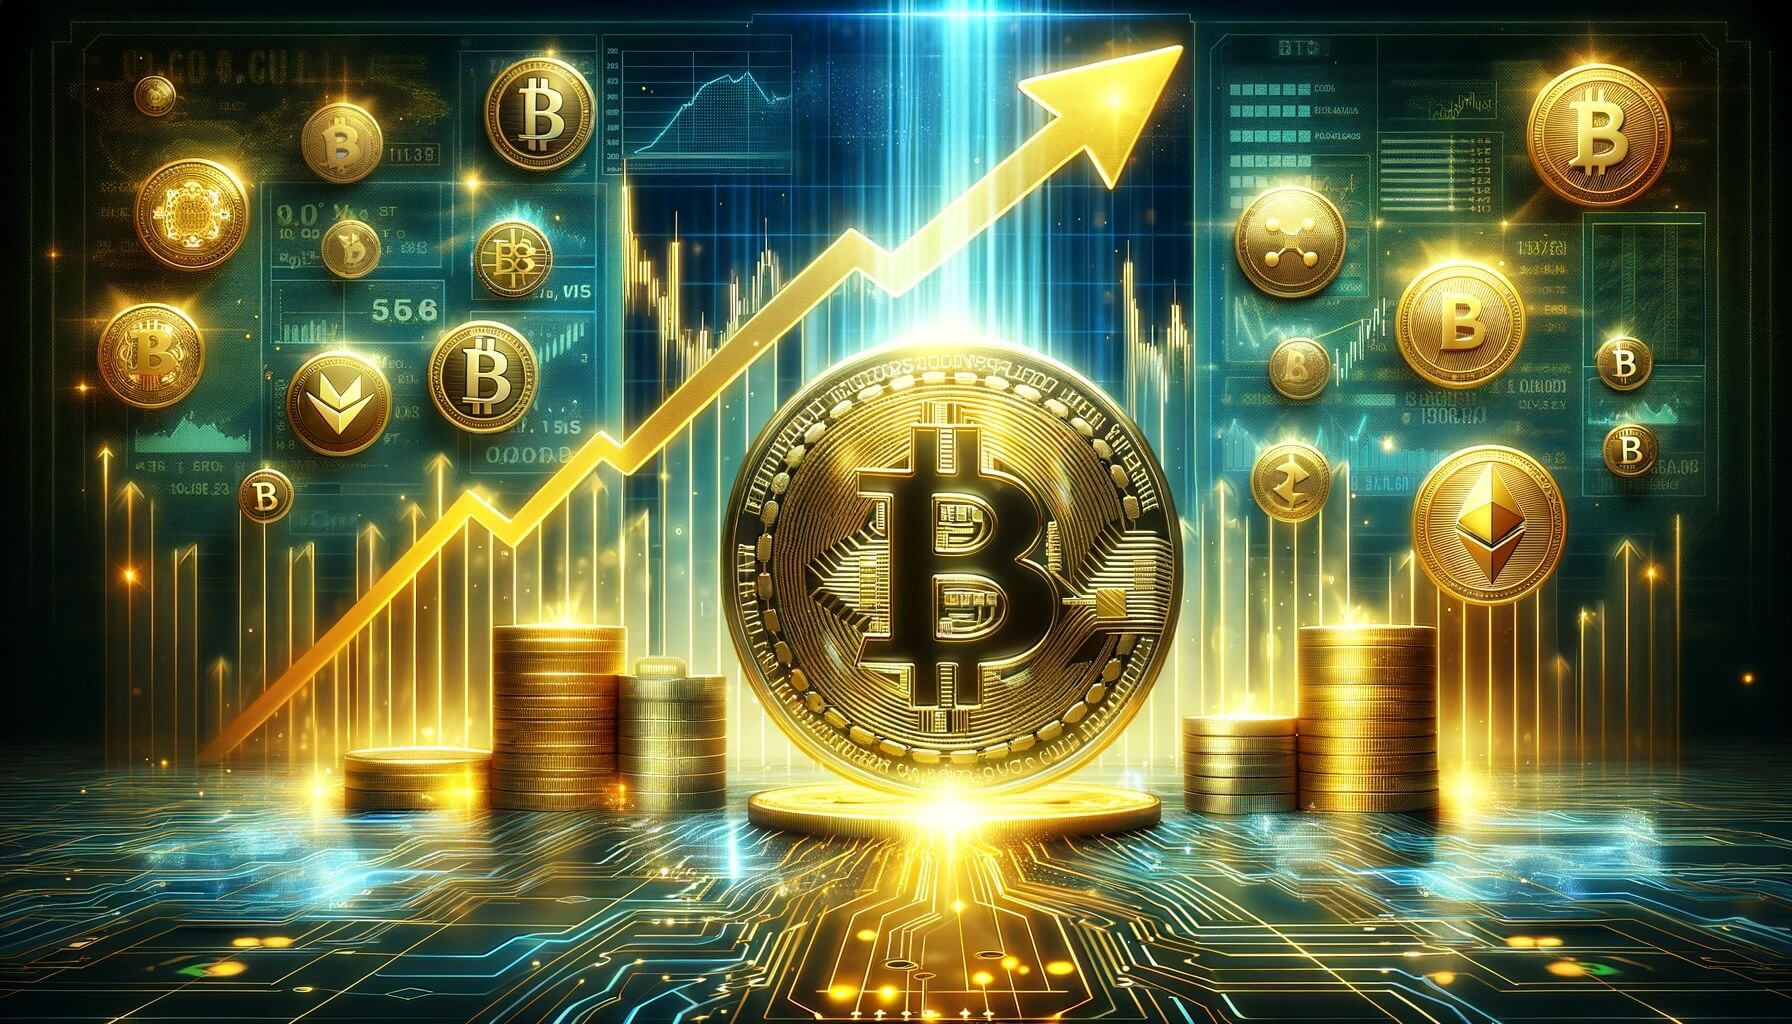 Bitcoin ETF Launch Shatters Records, Attracts Over $4 Billion